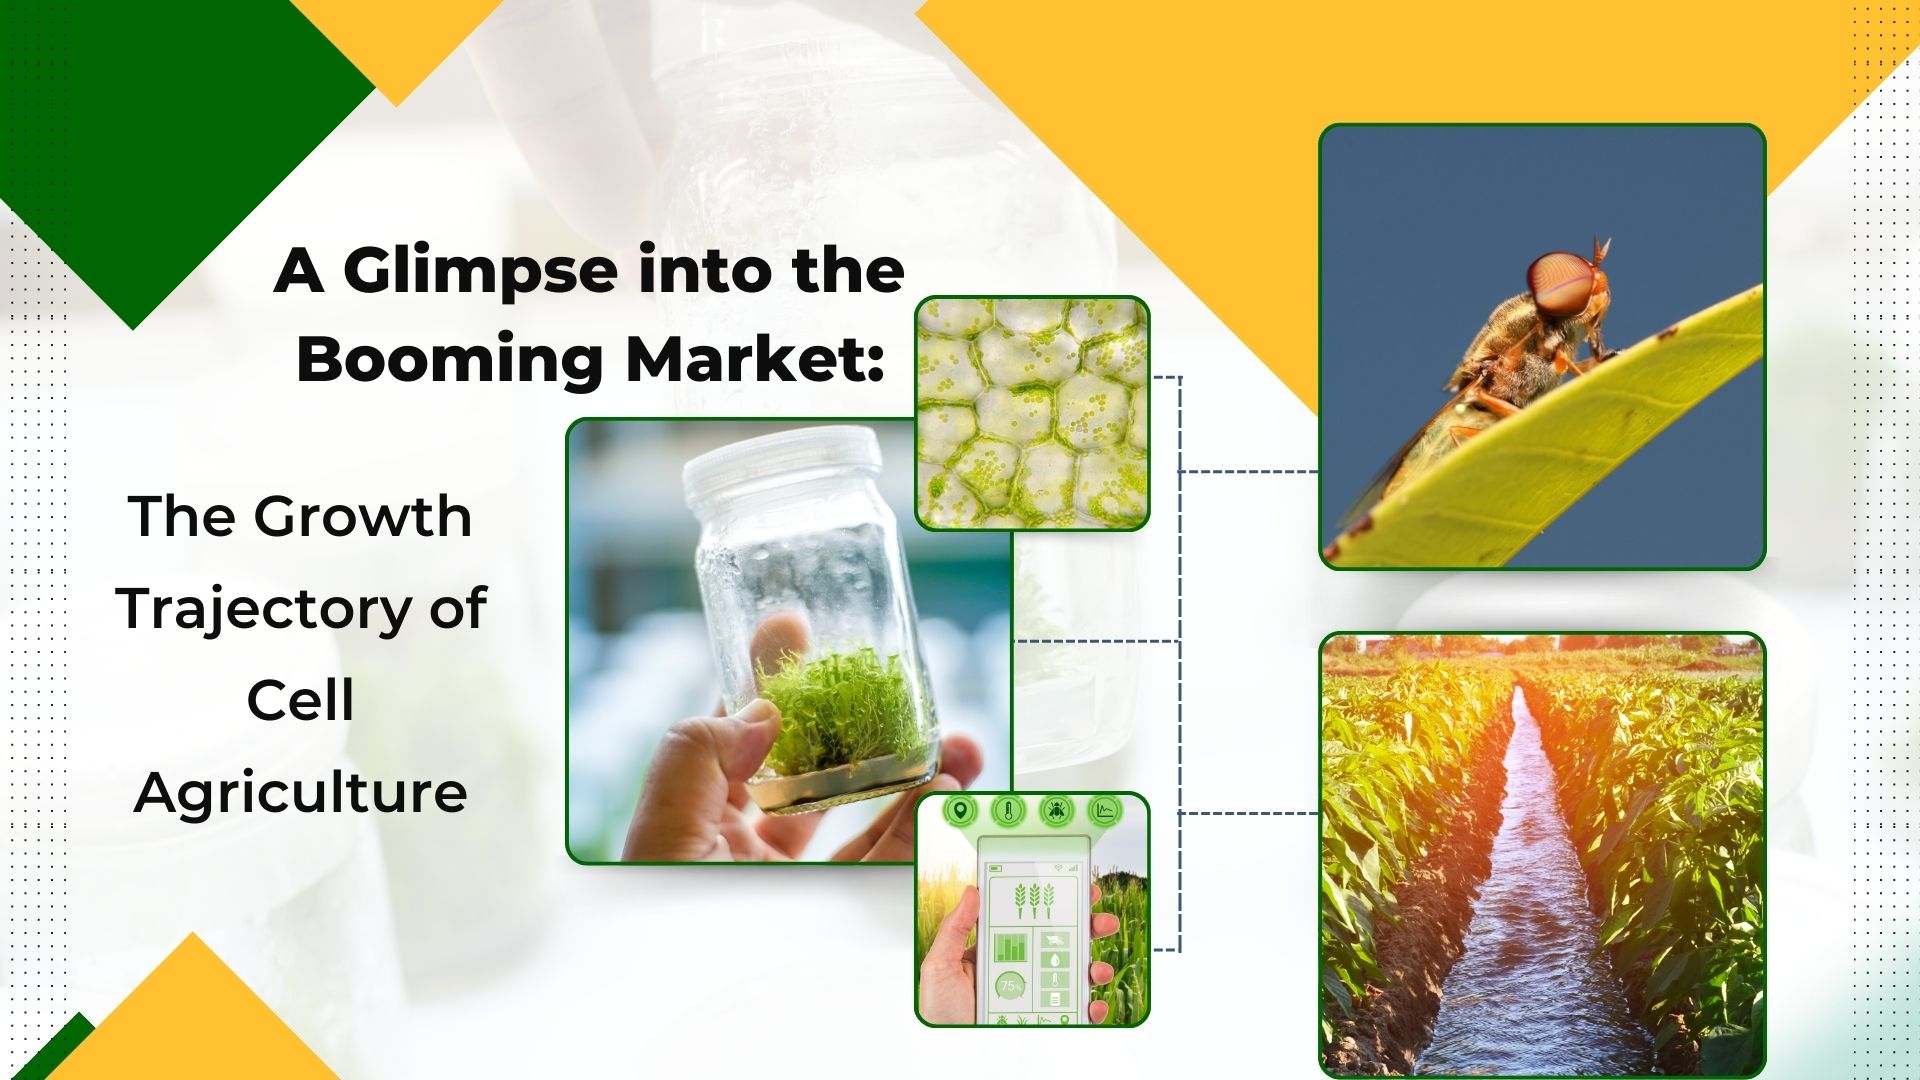 A Glimpse into the Booming Market: The Growth Trajectory of Cellular Agriculture